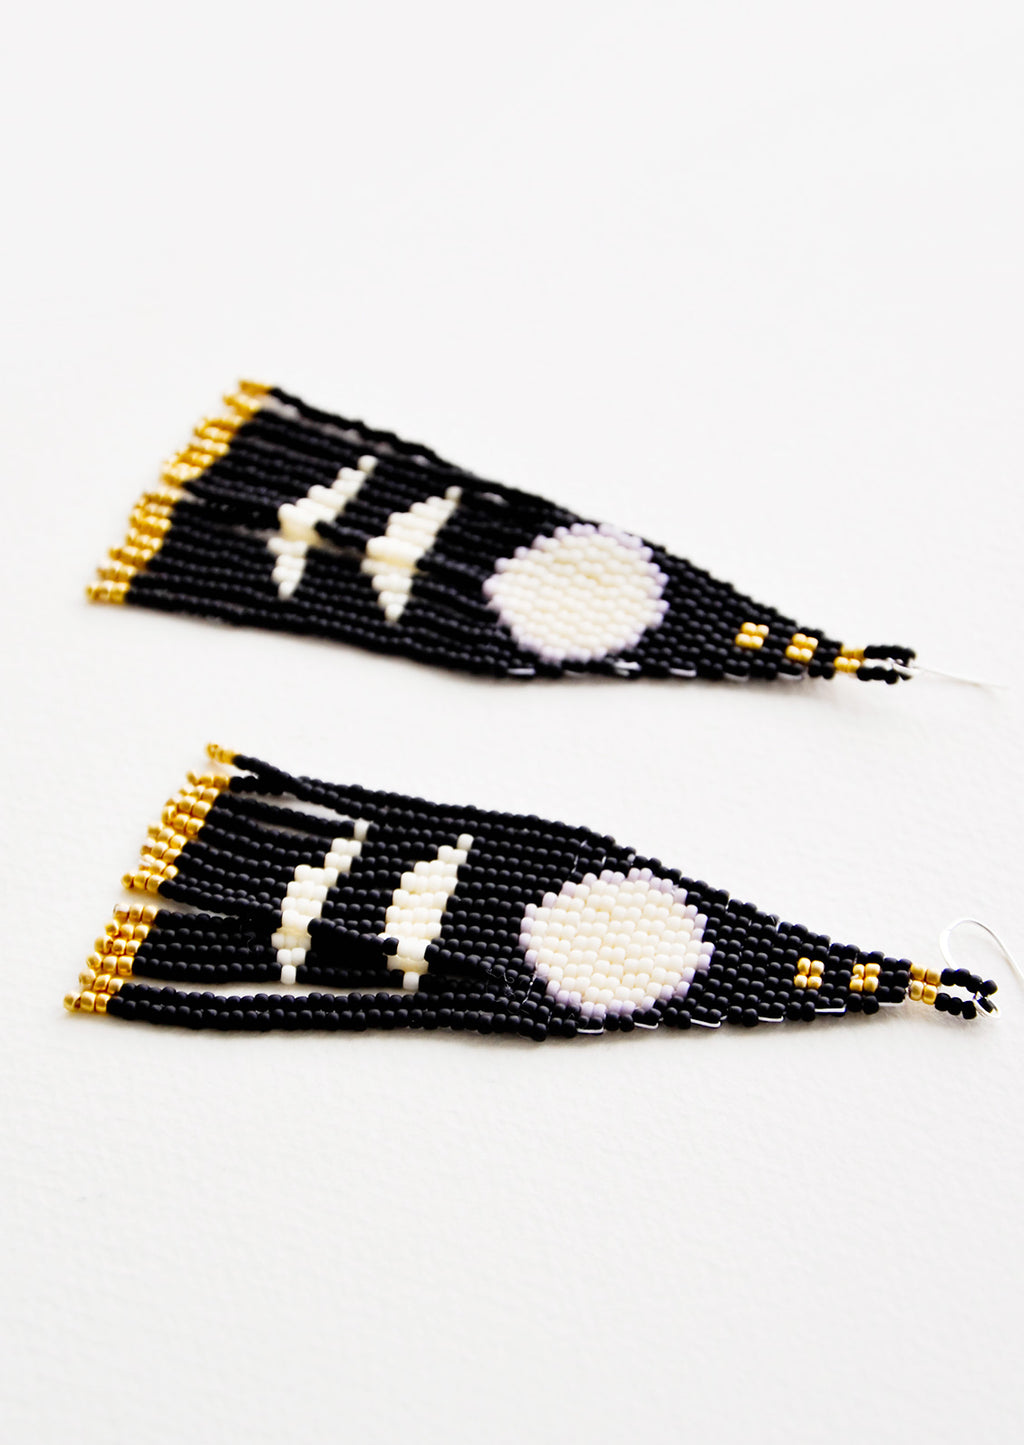 3: Dangling earrings with black and white geometric beaded shapes and black and gold beaded fringe.